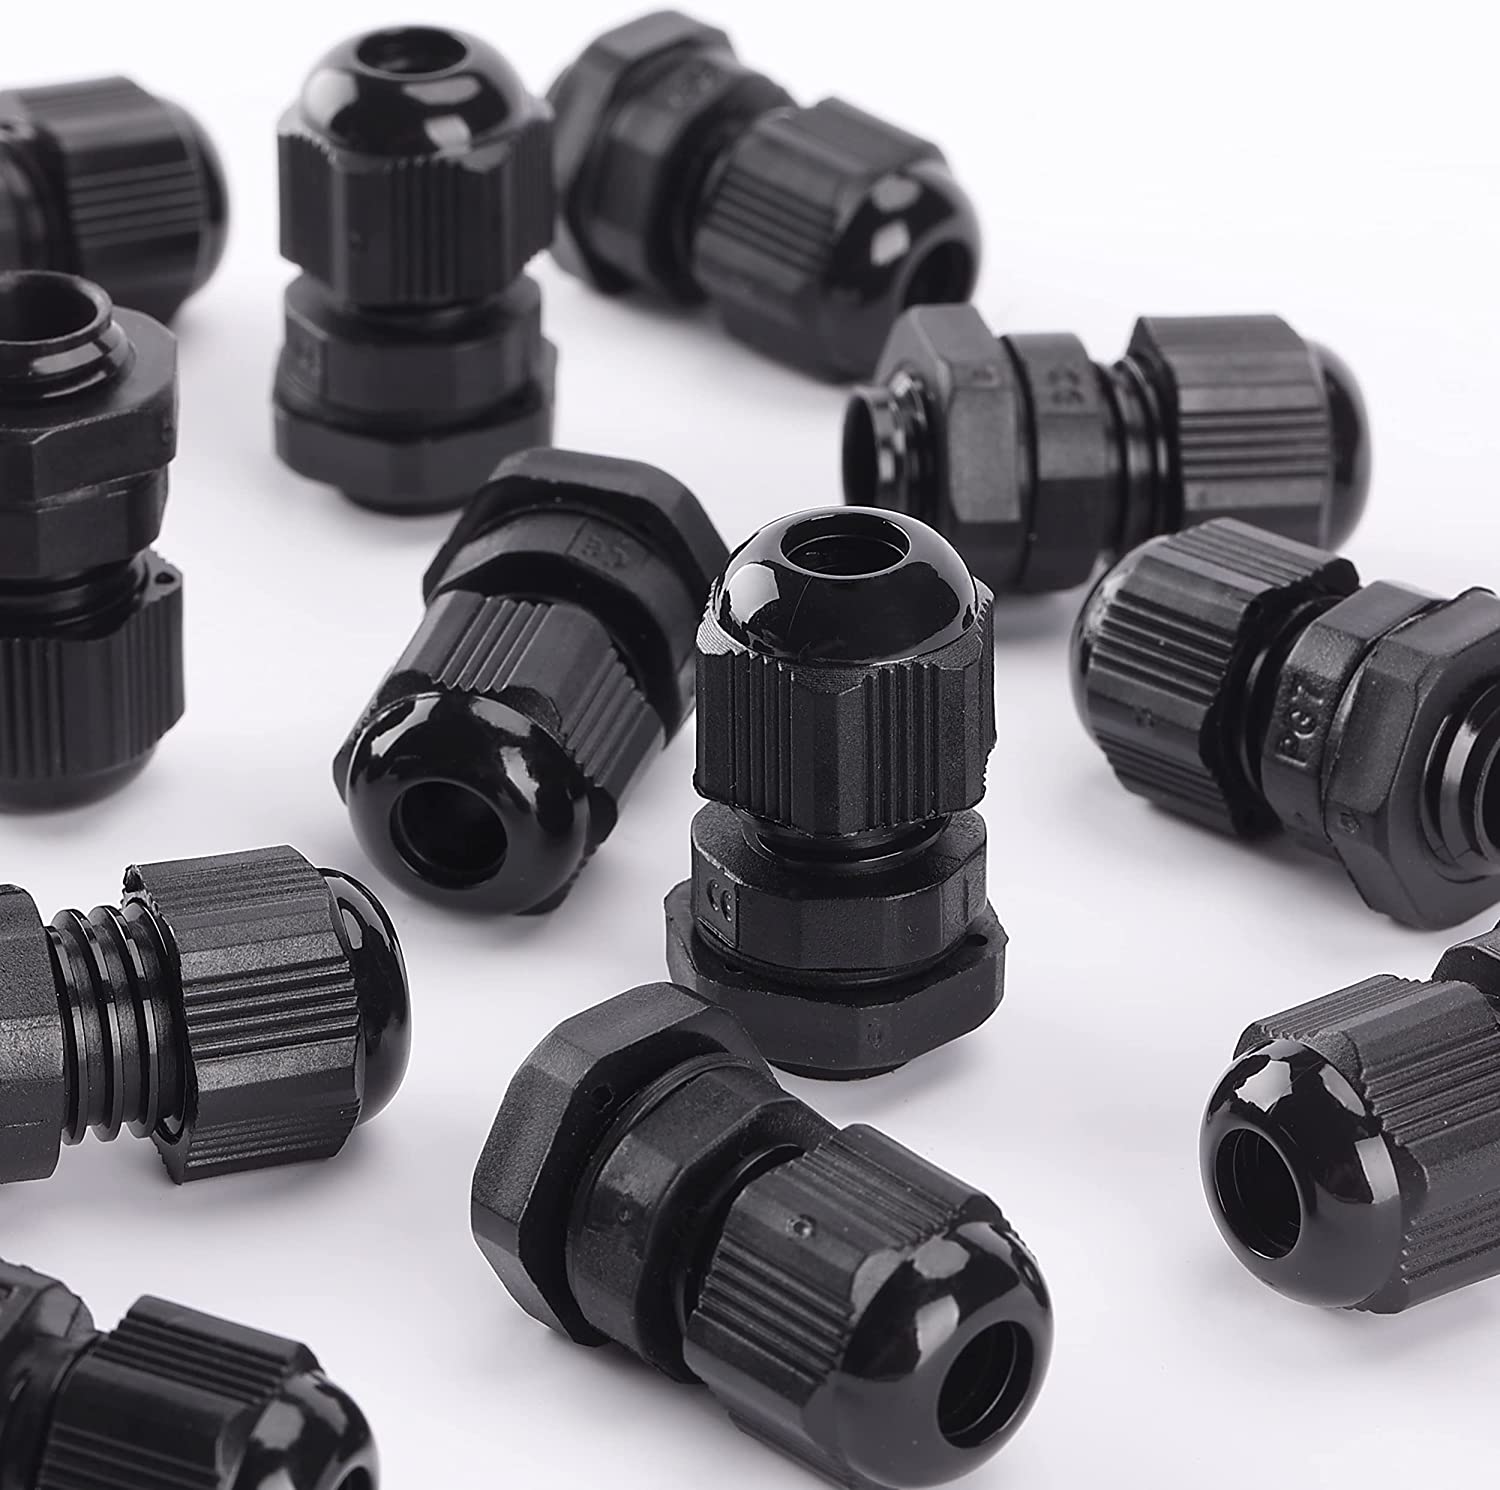 Cable Gland, PG7, 20 Pack, 3-6.5 mm Cable Gland Connectors, Nylon Strain  Relief Cord Connector - Bates Choice